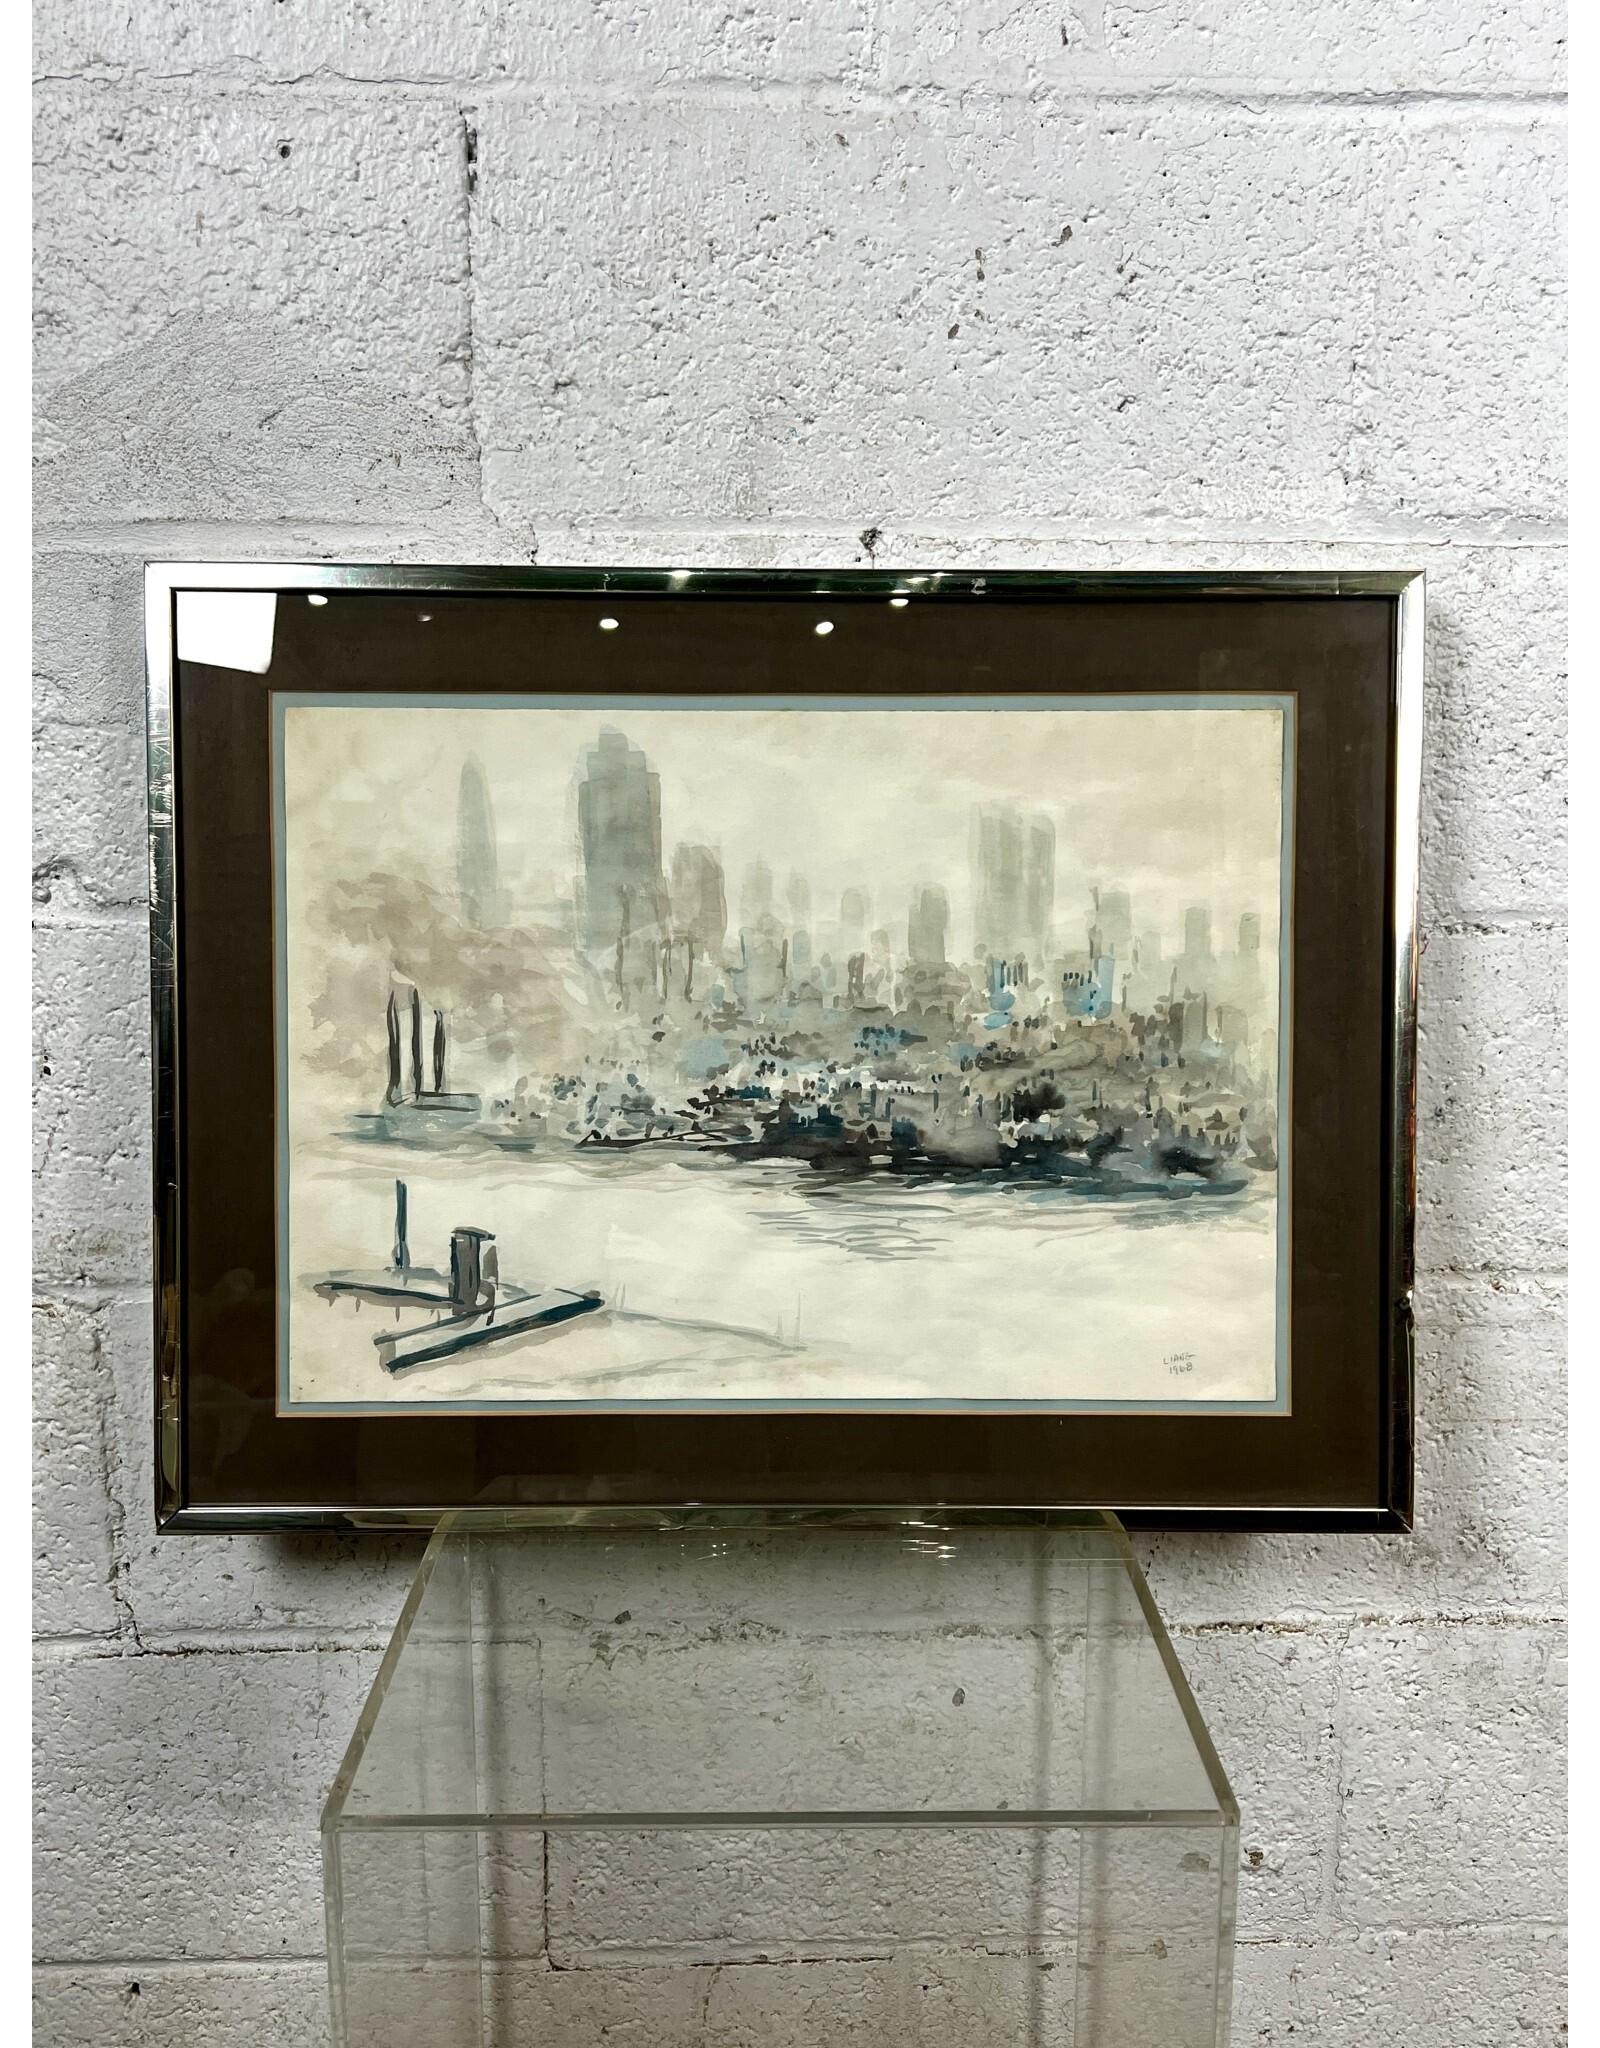 View From Across the River, framed watercolor painting, sgnd Liang 1968